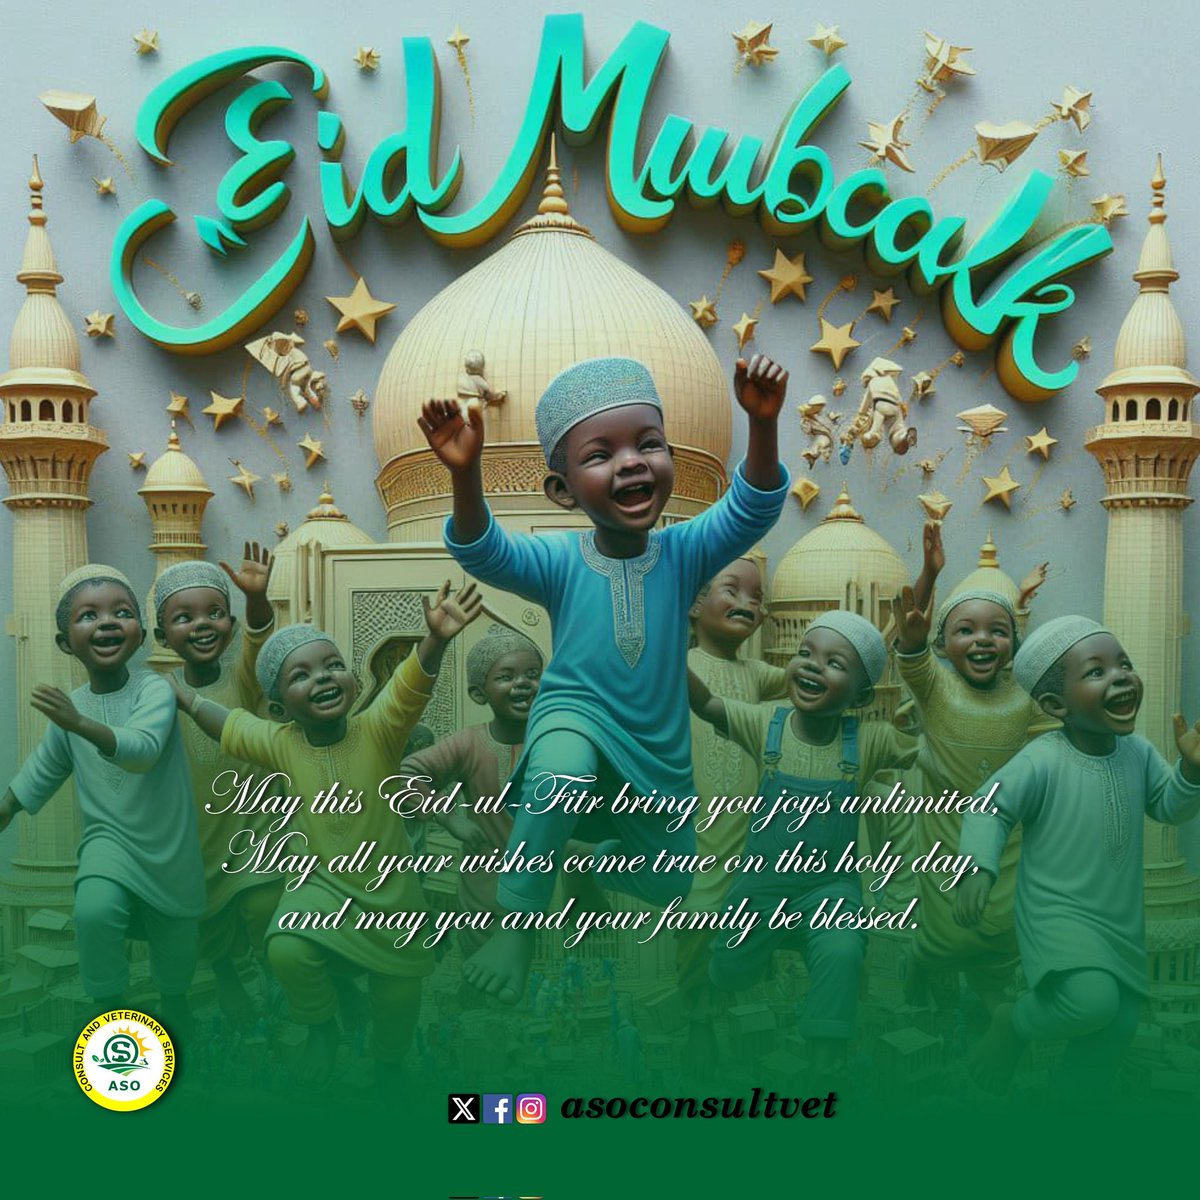 Greetings of Eid-el-Fitr to all of our Muslim countrymen who have completed the spiritual test of the 30-day Ramadan fast. May your prayers be heard and may God accept your sacrifices. Happy Eid Mubarak! #EID_MUBARAQ Minna waminkum taqoballahu...
#eidmubarak #asoconsultvet